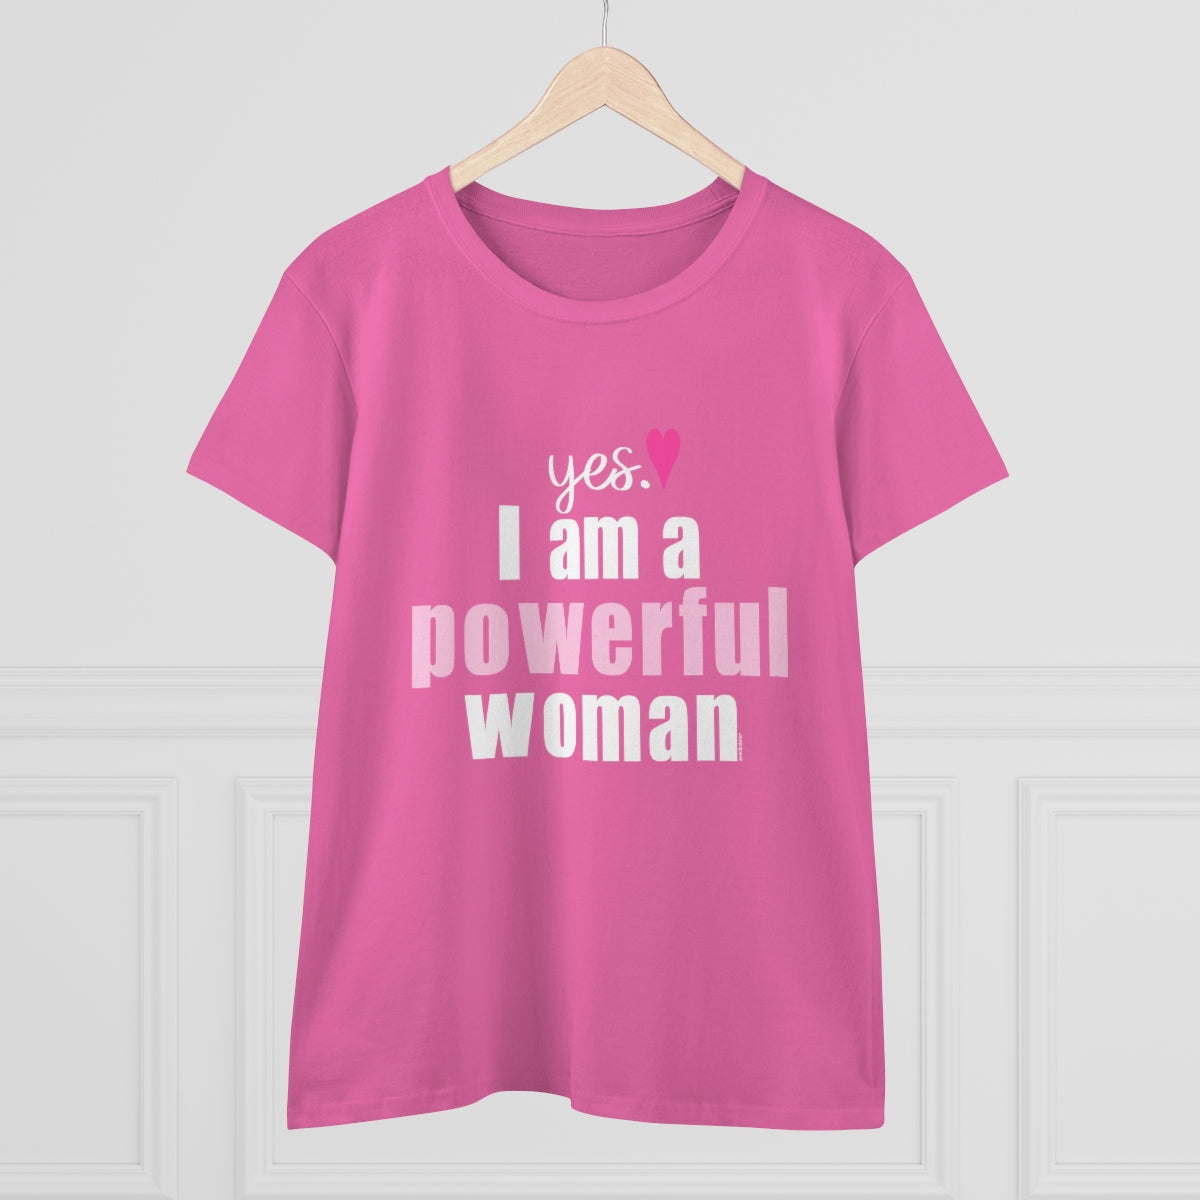 YES. I am a POWERFUL Woman .: Women's Midweight 100% Cotton Tee (Semi-fitted)